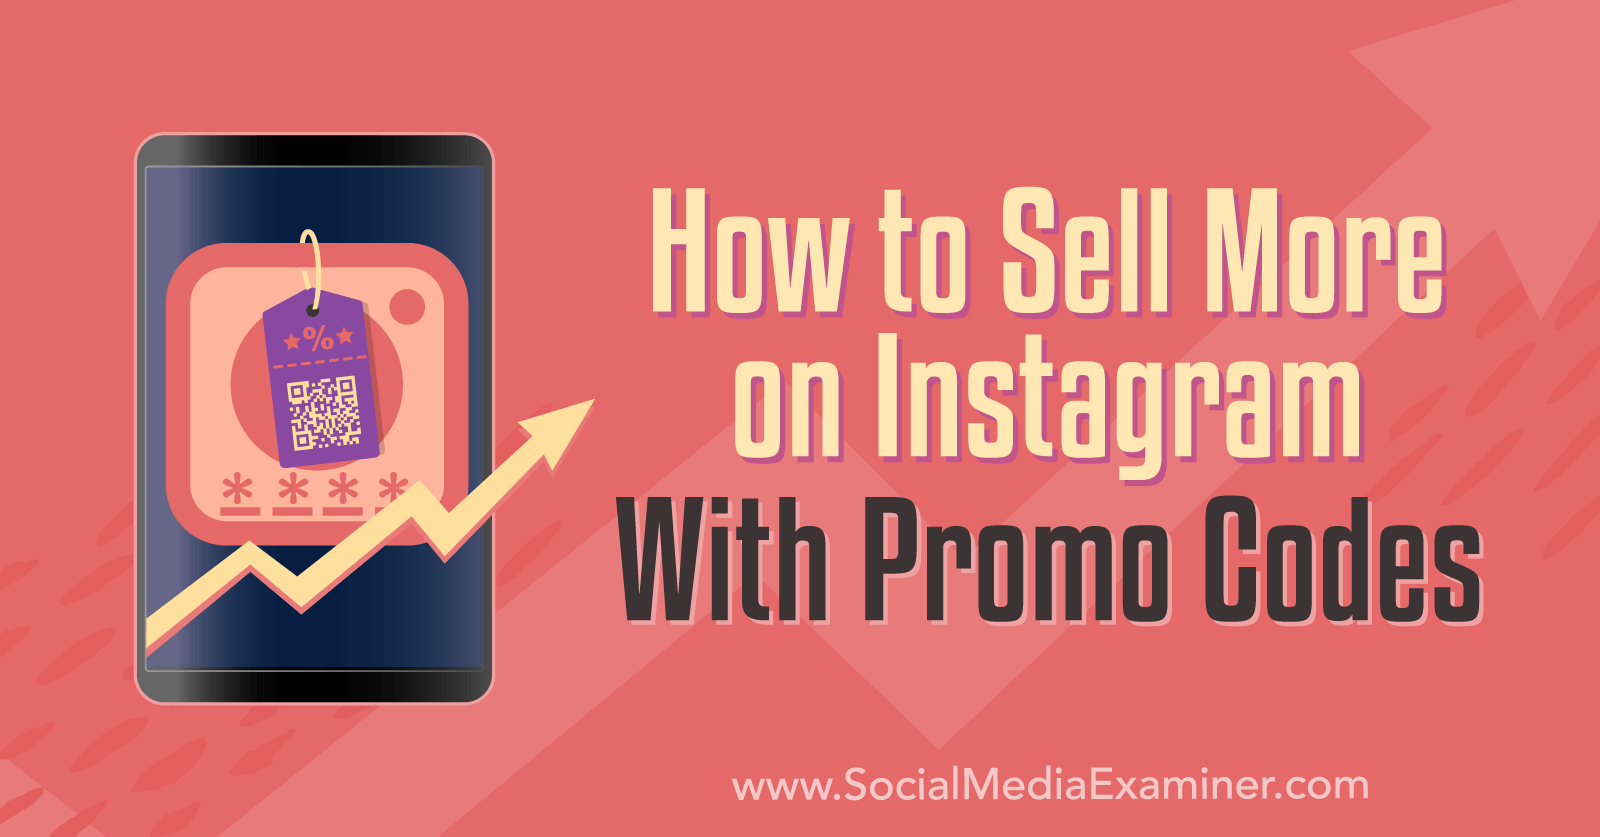 How to Sell More on Instagram With Promo Codes-Social Media Examiner